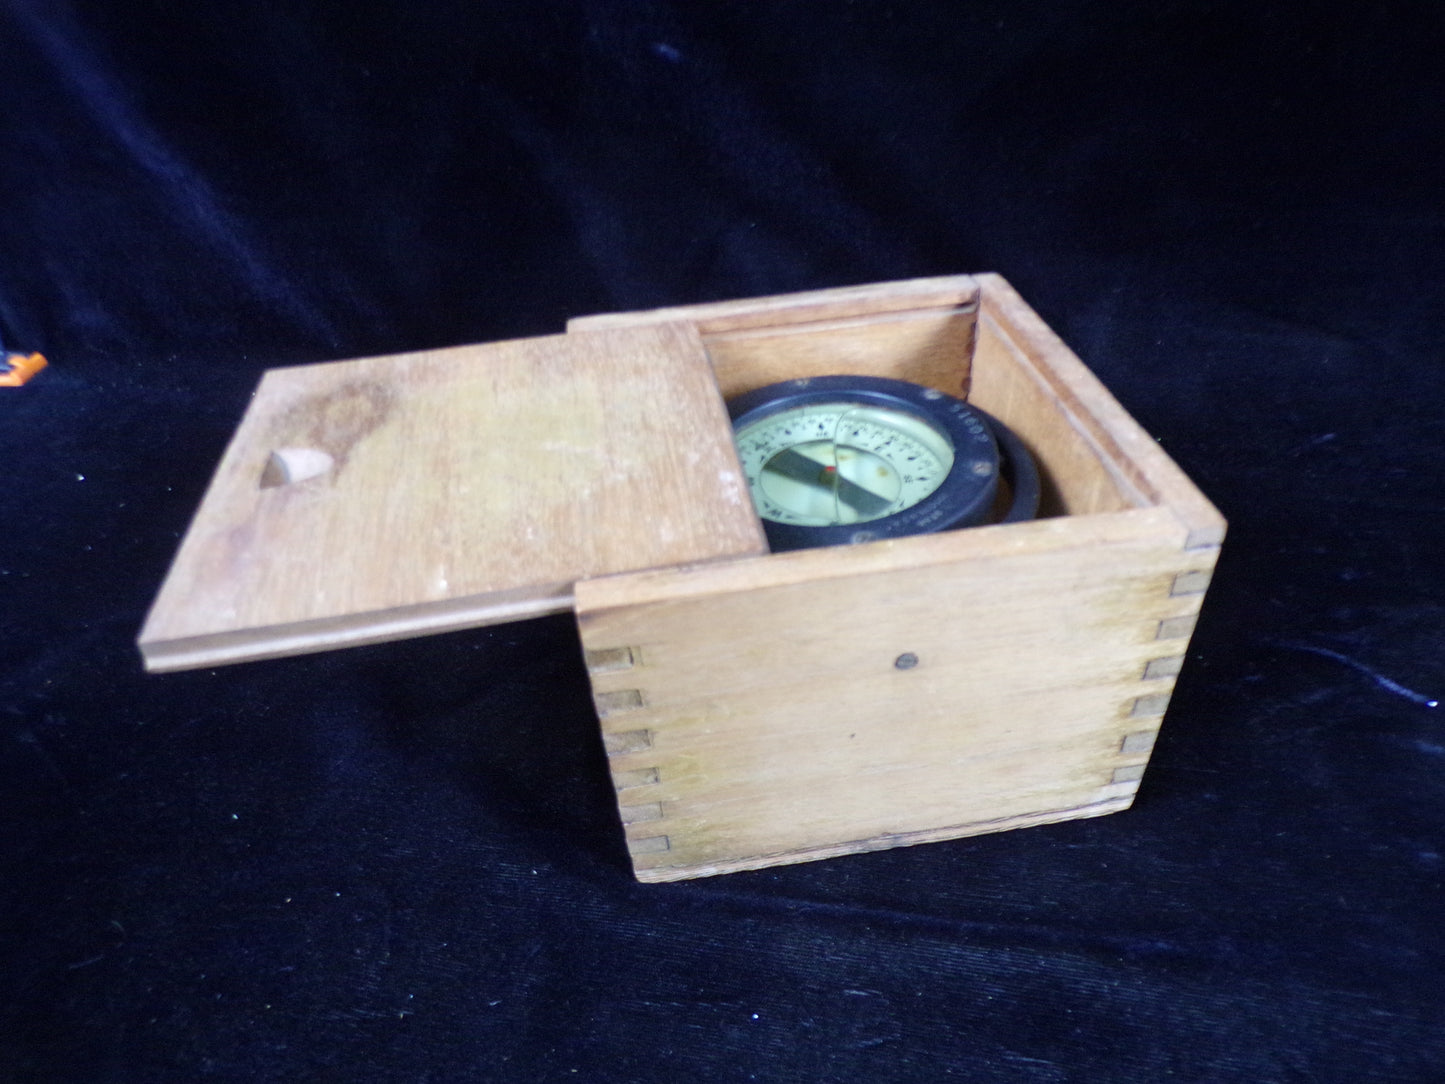 Compass - in Wooden Case